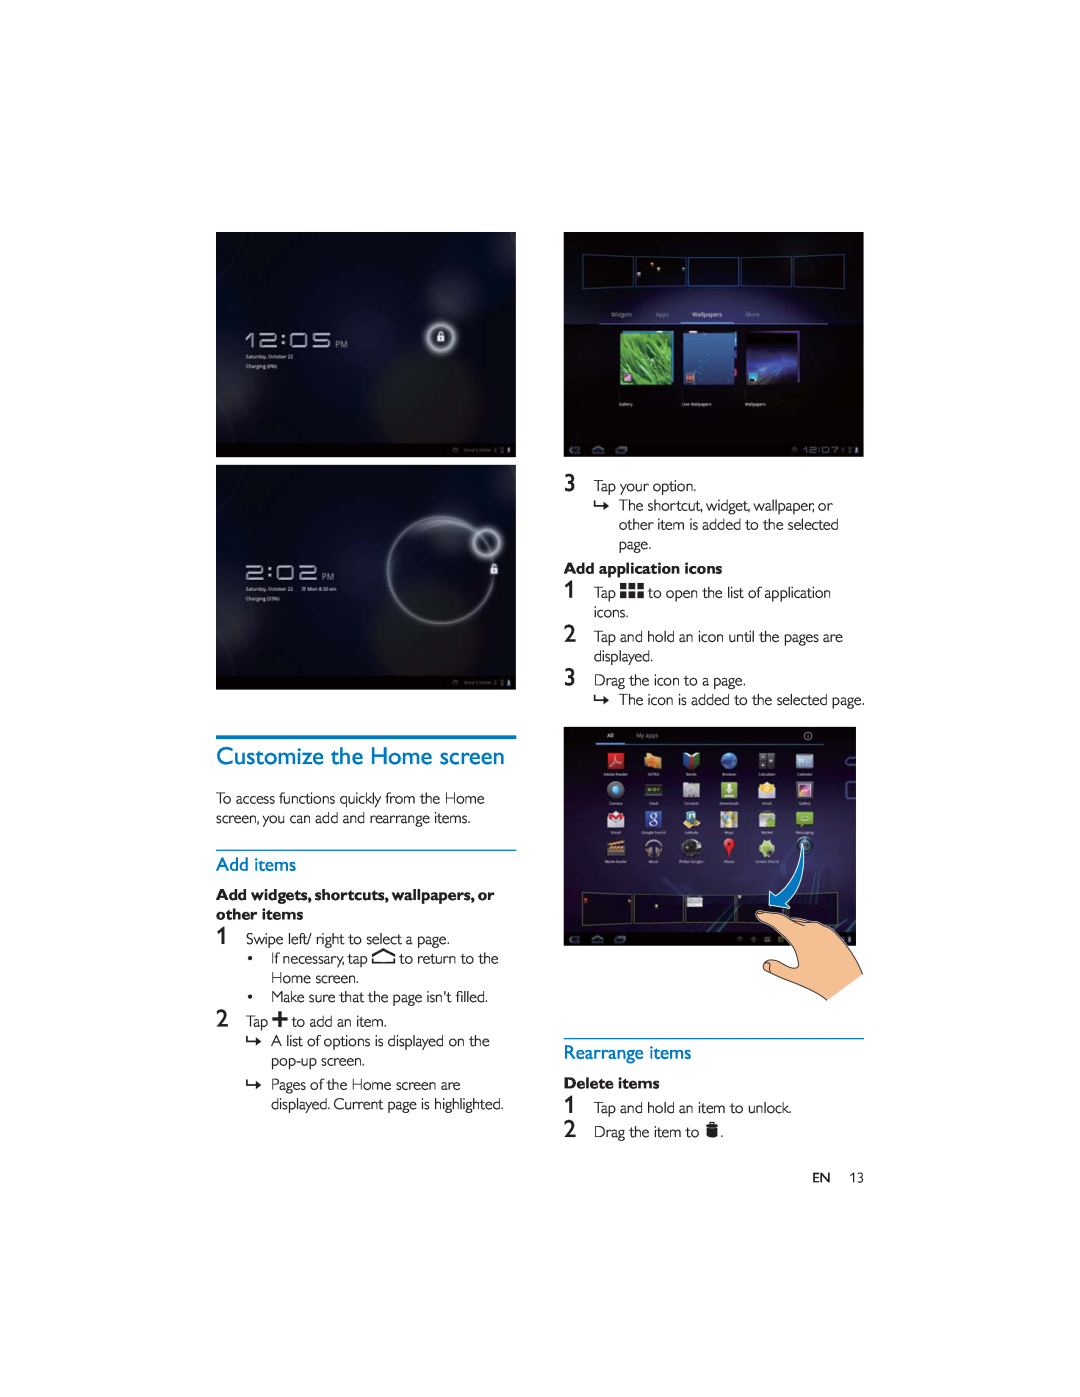 Philips PI7000/93 user manual Customize the Home screen, Add items, Rearrange items, Add application icons, Delete items 